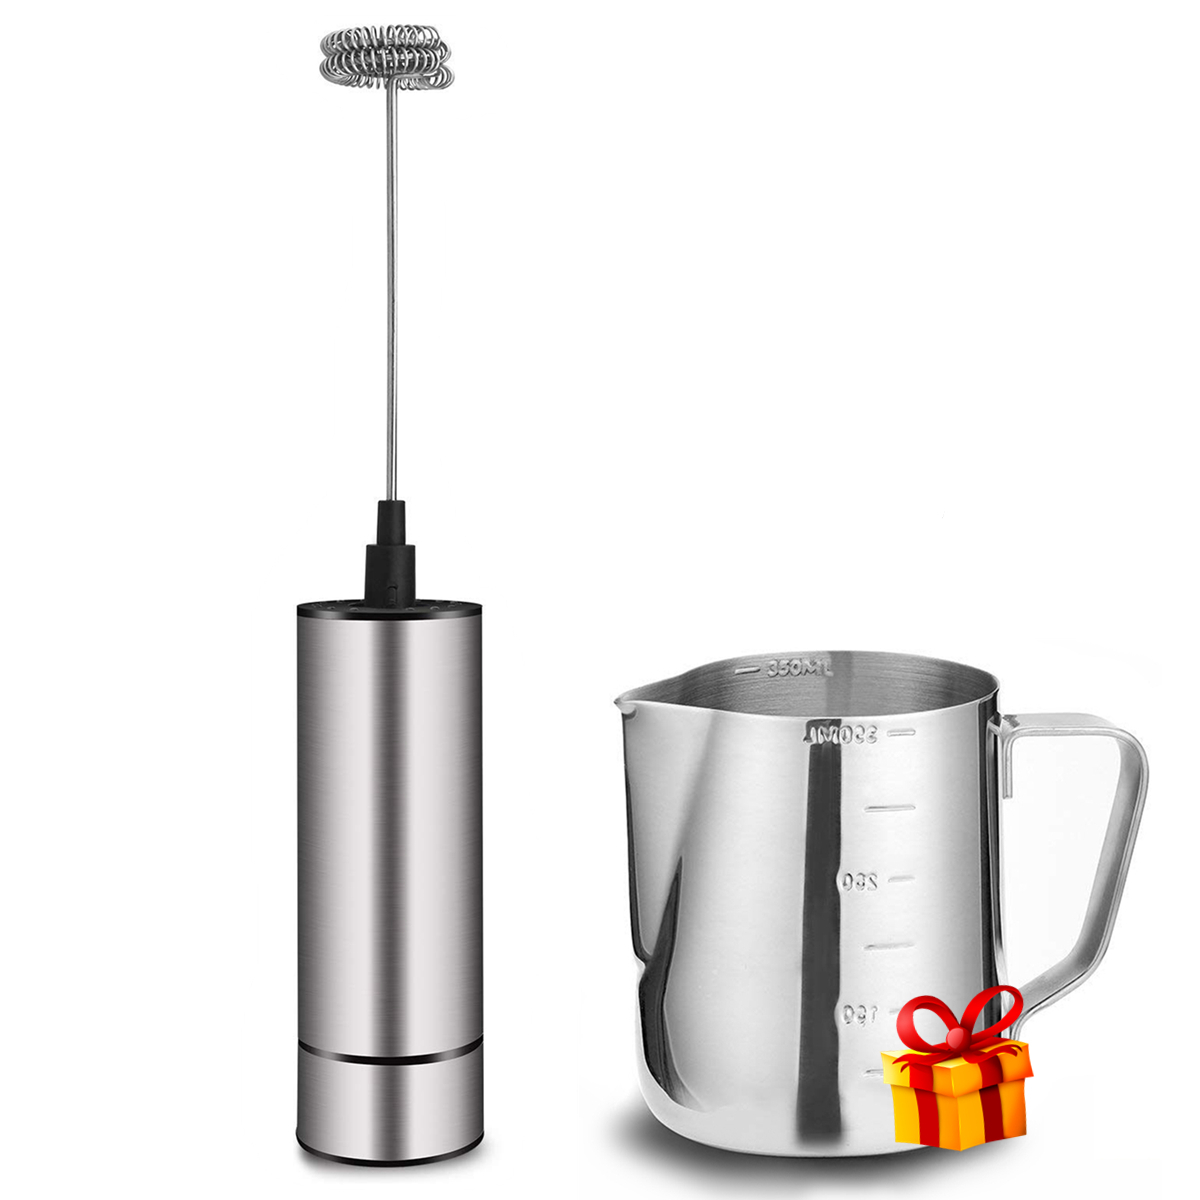 http://basecentsz.com/wp-content/uploads/2019/05/milk-frother-main-4_clear.jpg